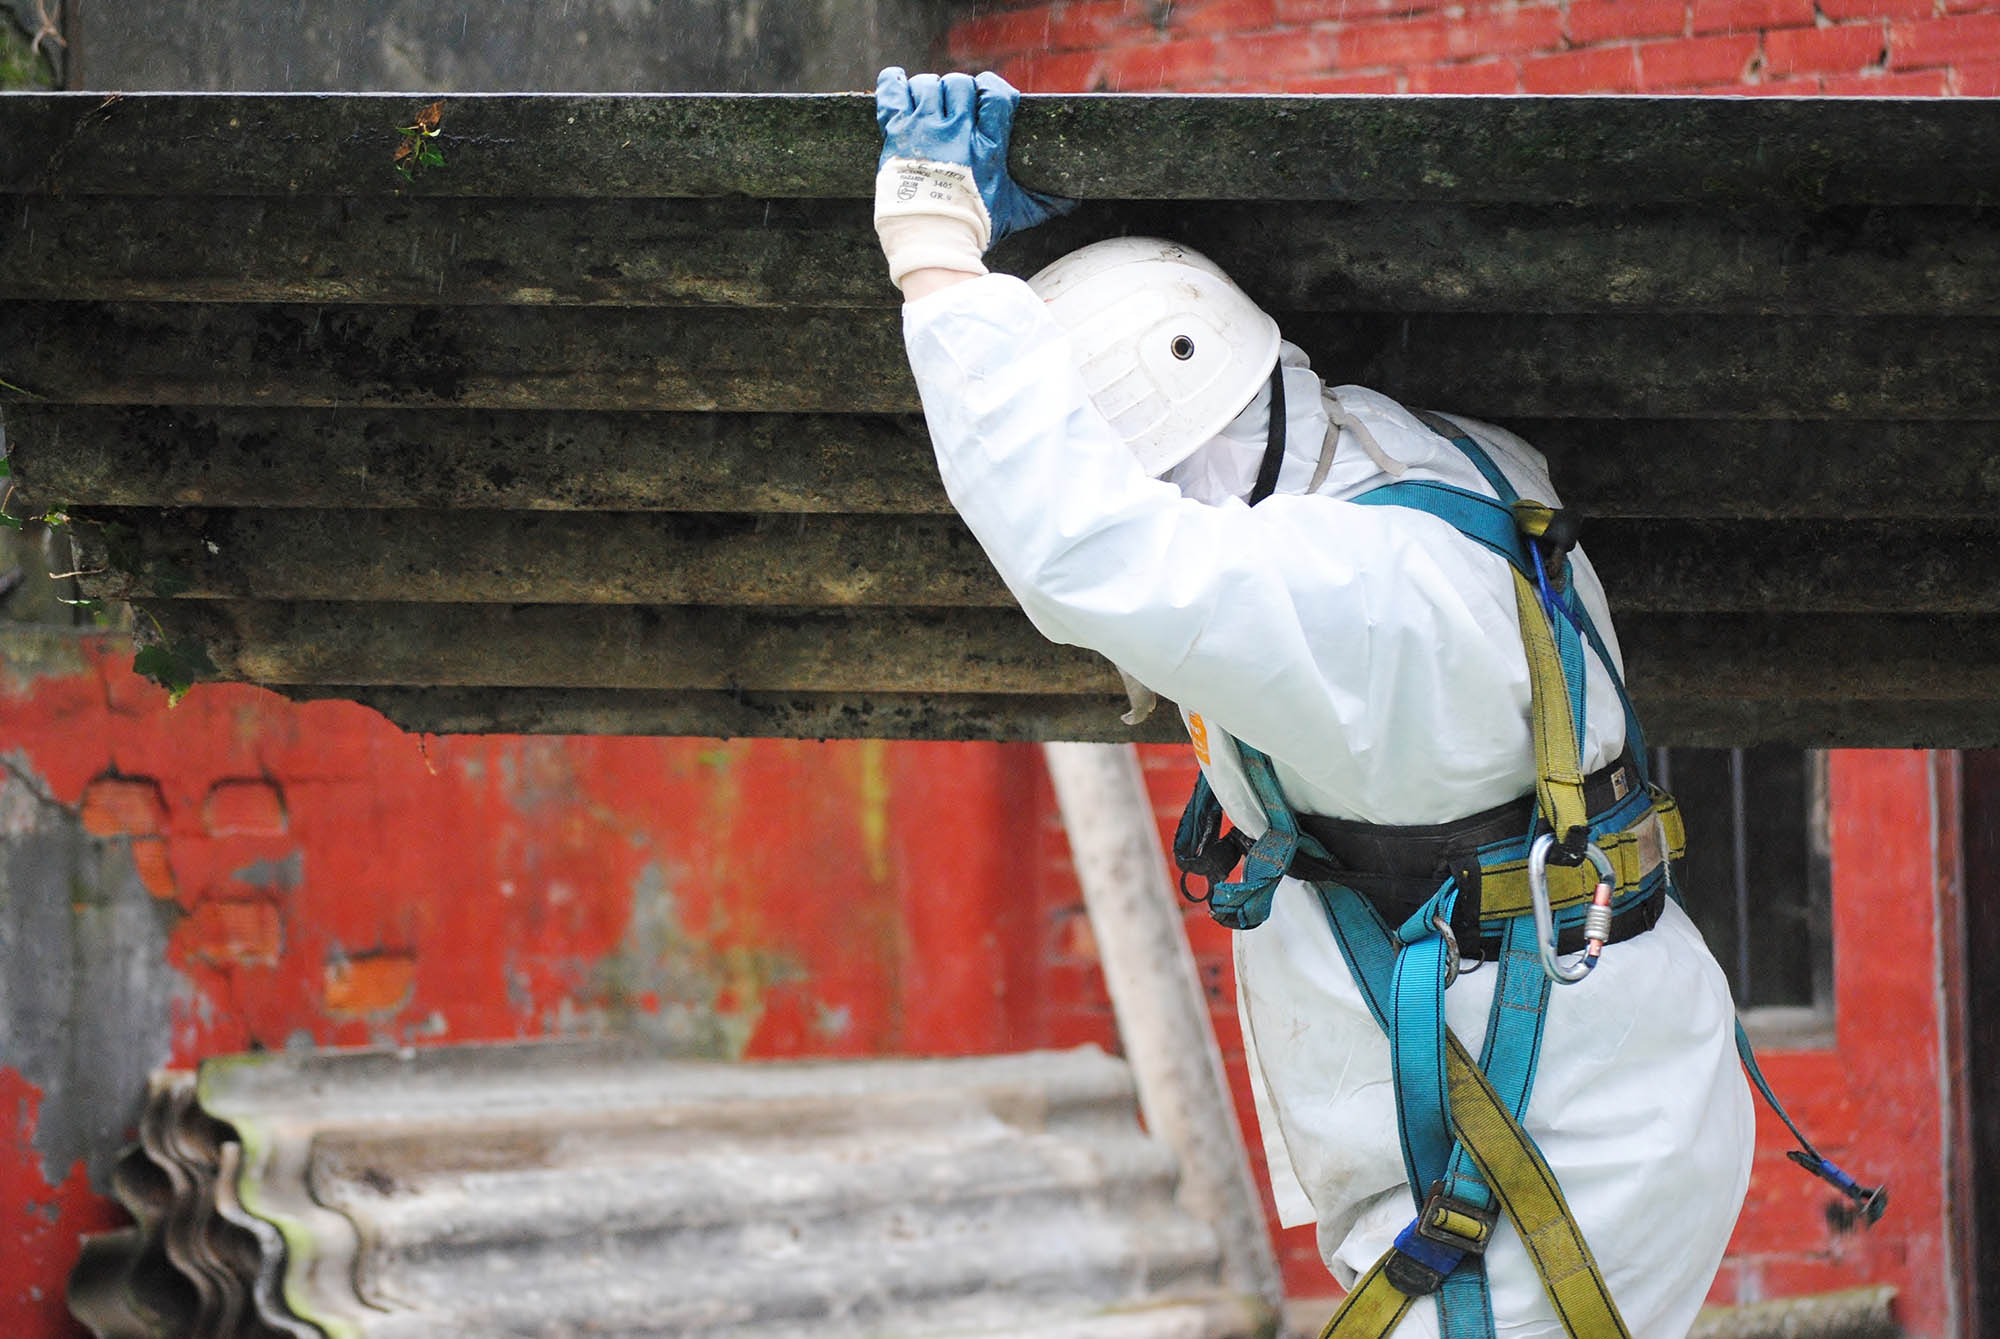 Asbestos protection against expsoure and diseases like asbestosis